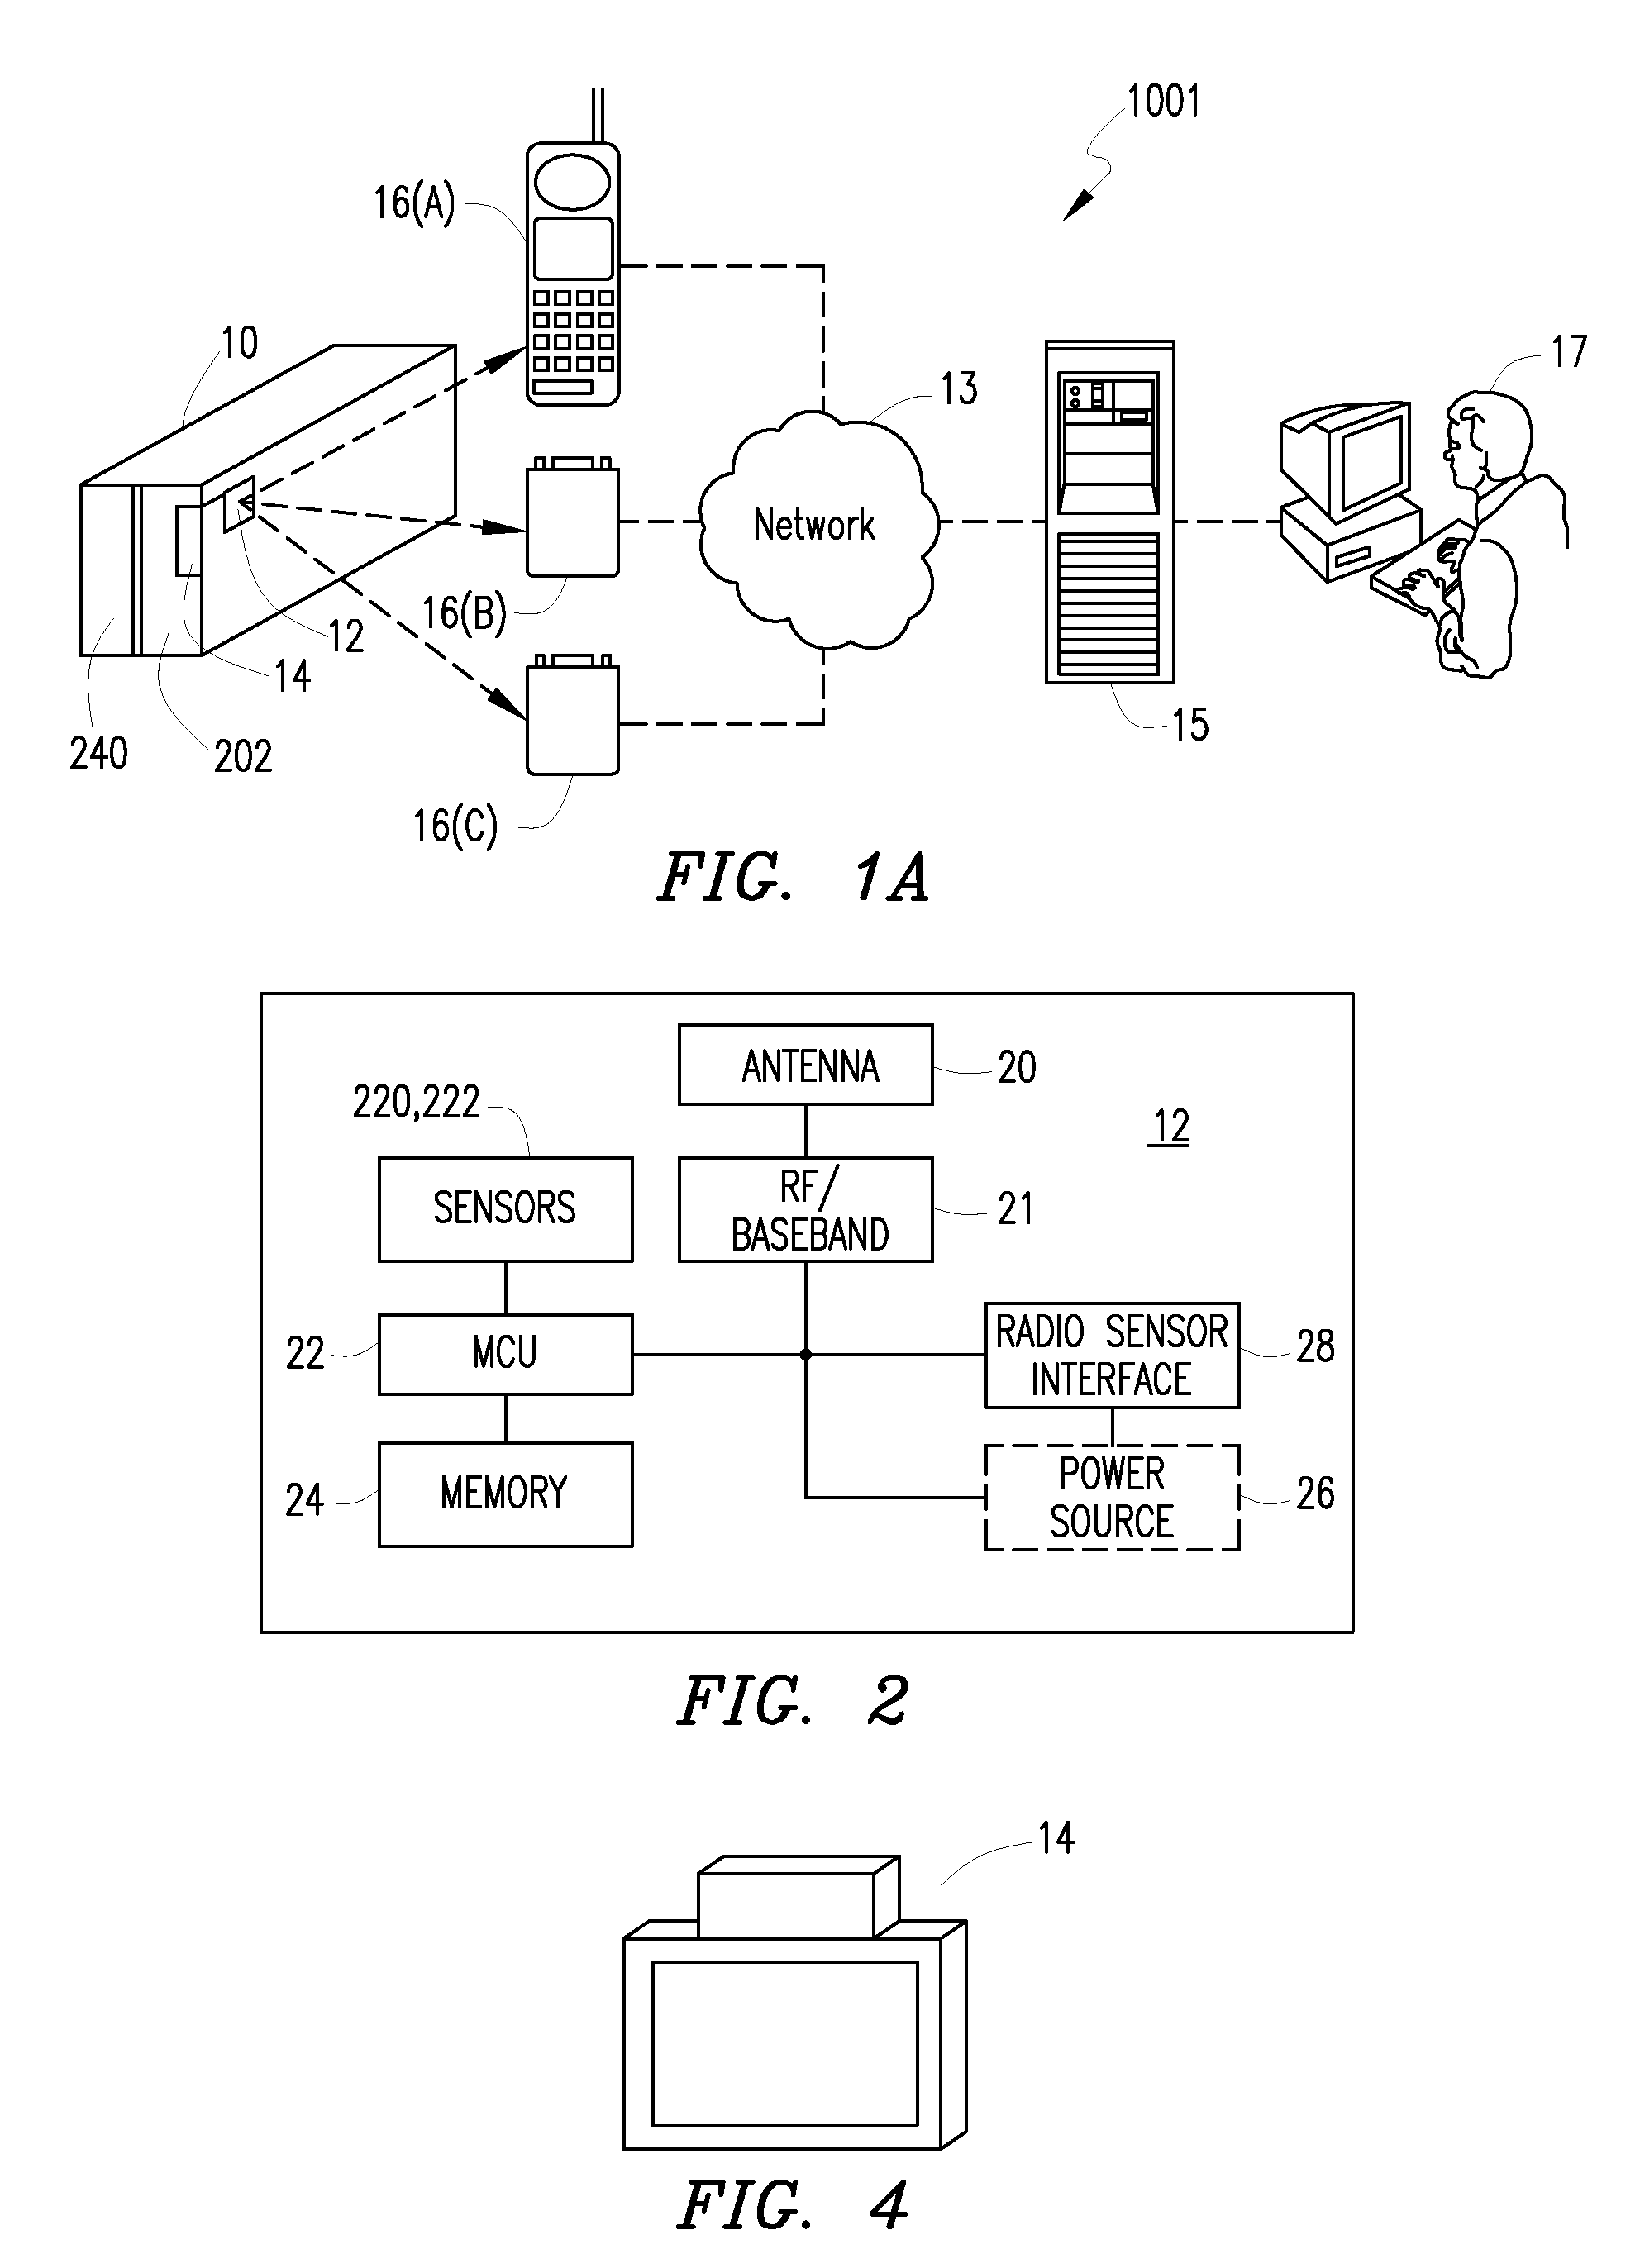 Method of and system for monitoring security of containers